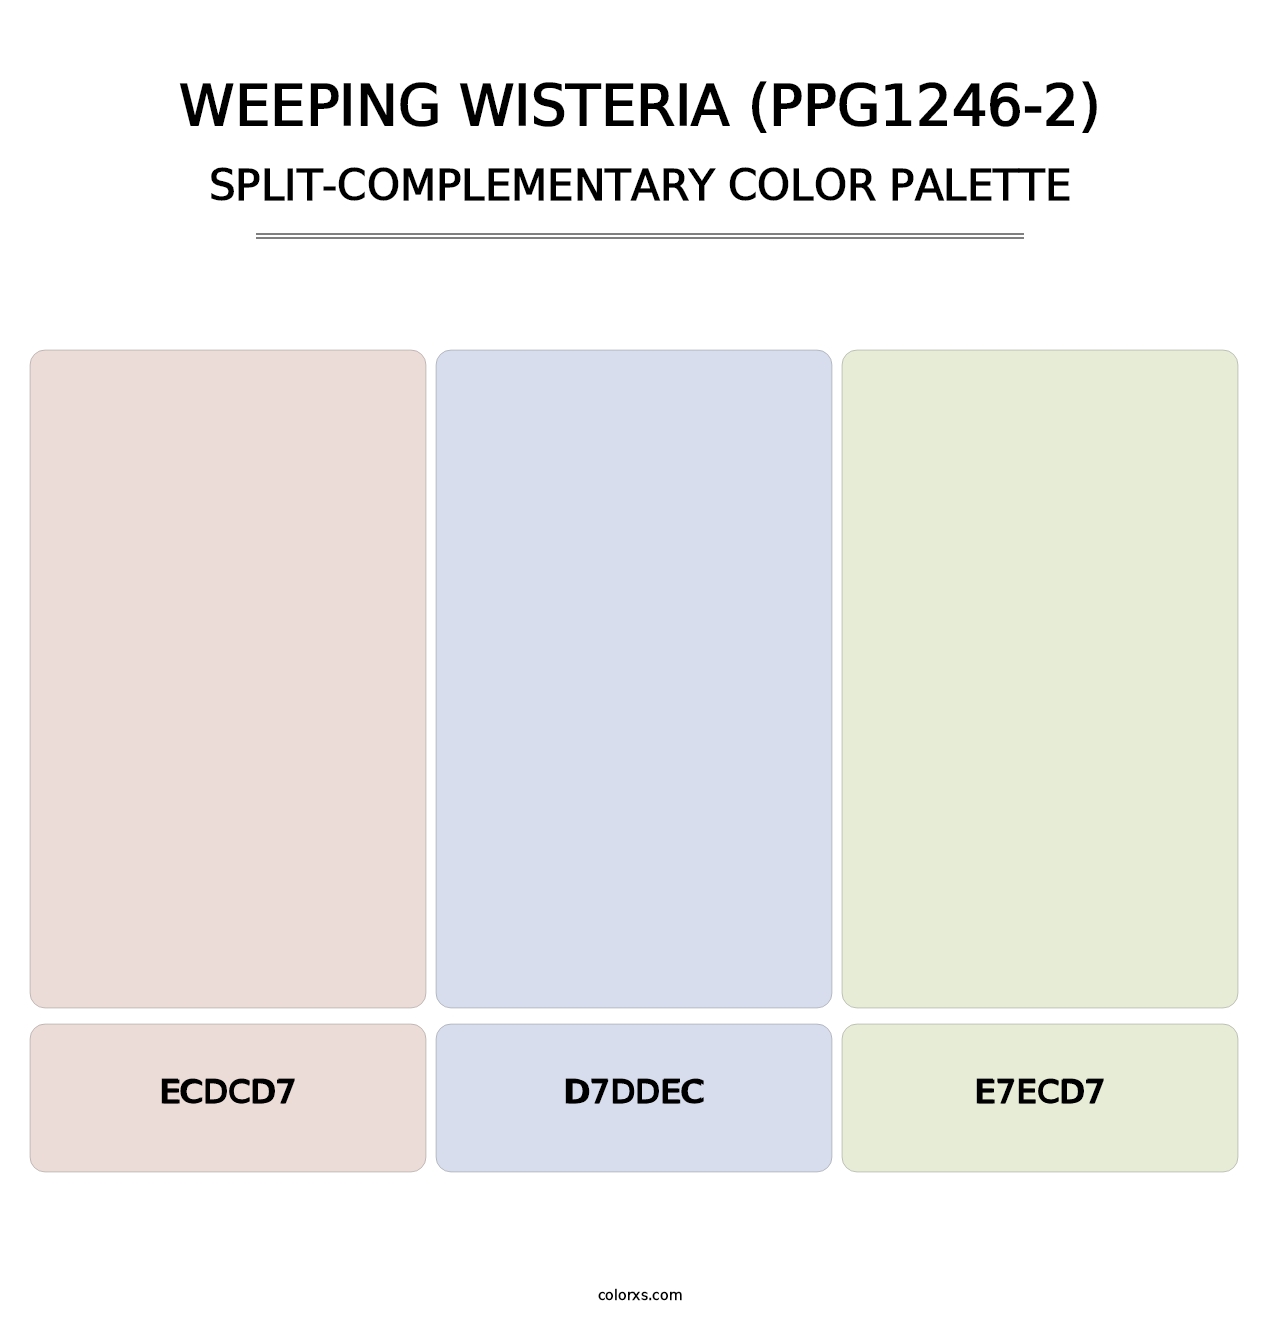 Weeping Wisteria (PPG1246-2) - Split-Complementary Color Palette